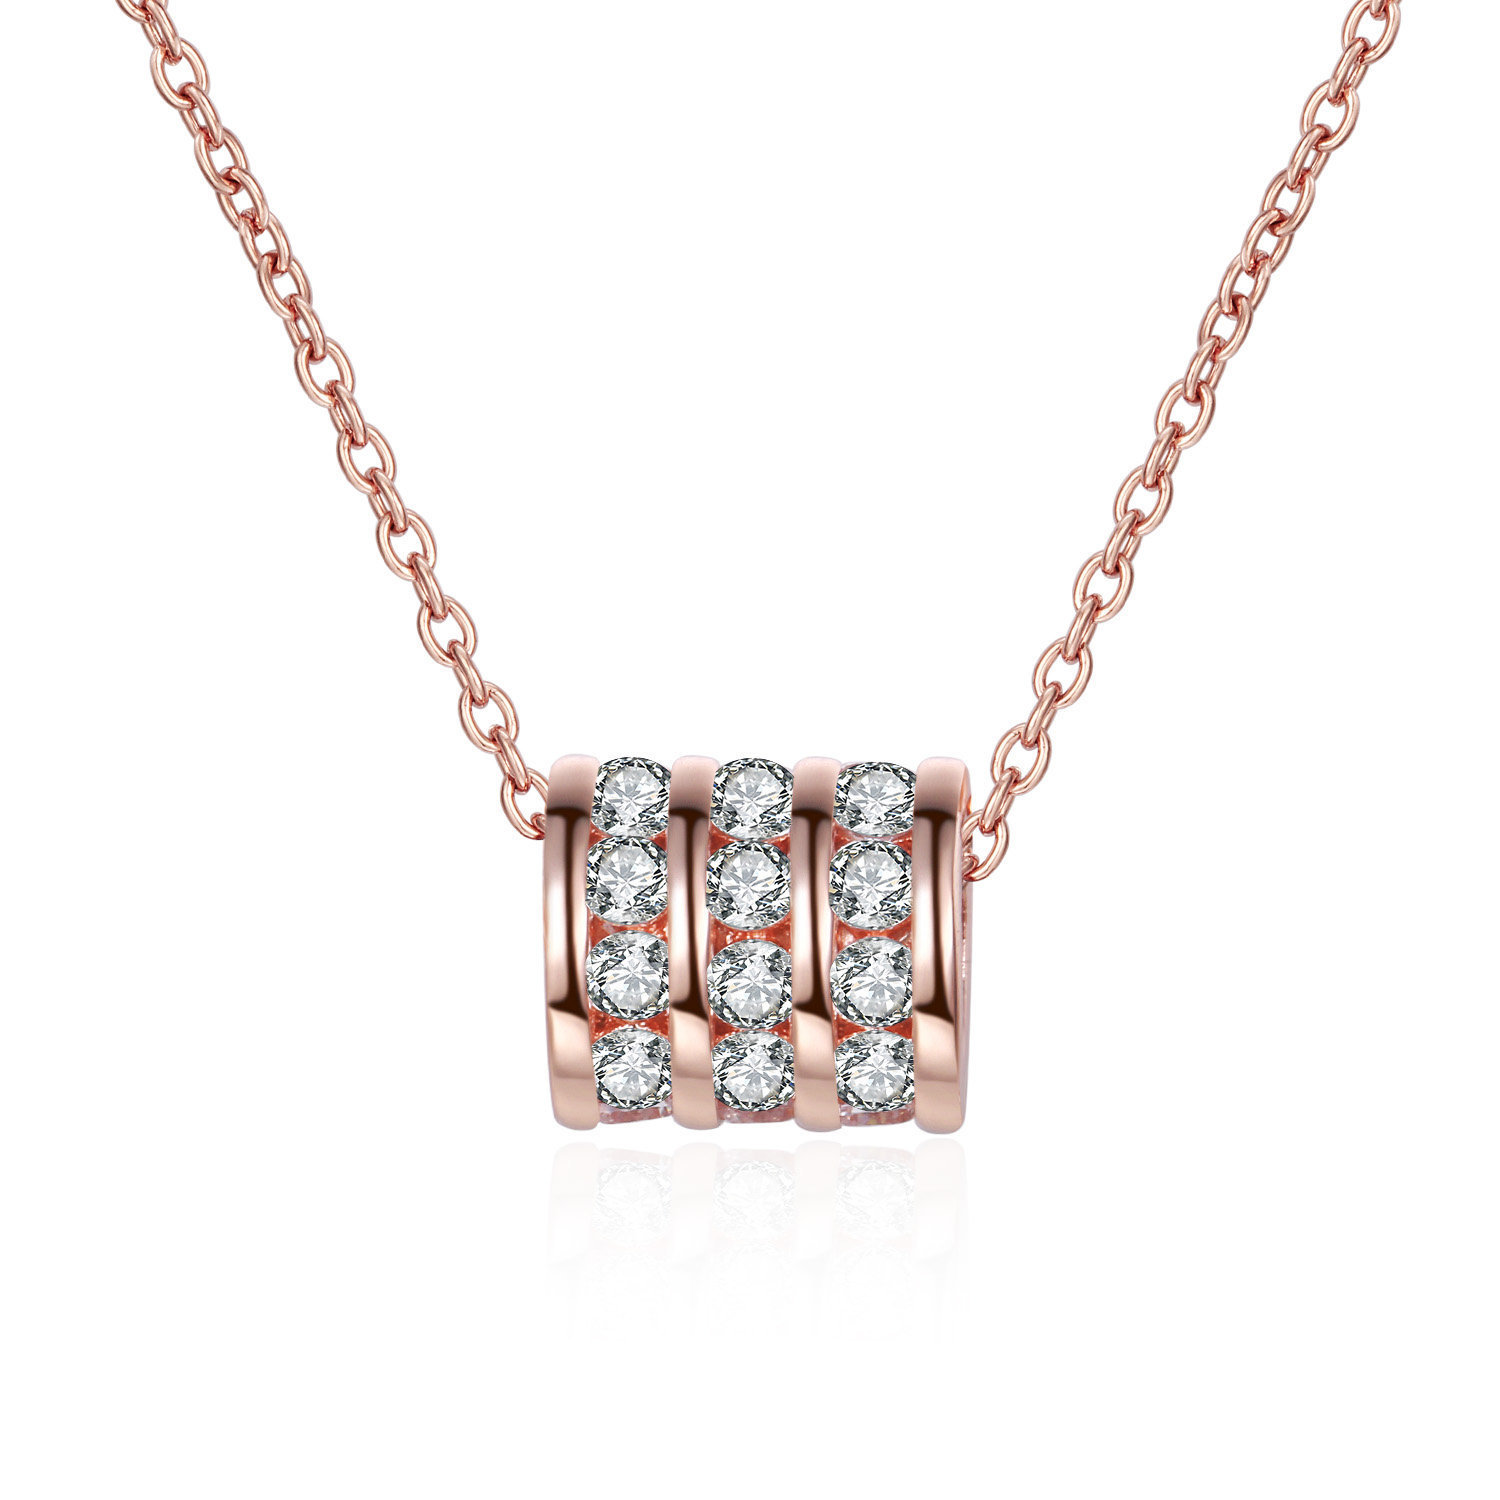 Rose gold necklace and pendant